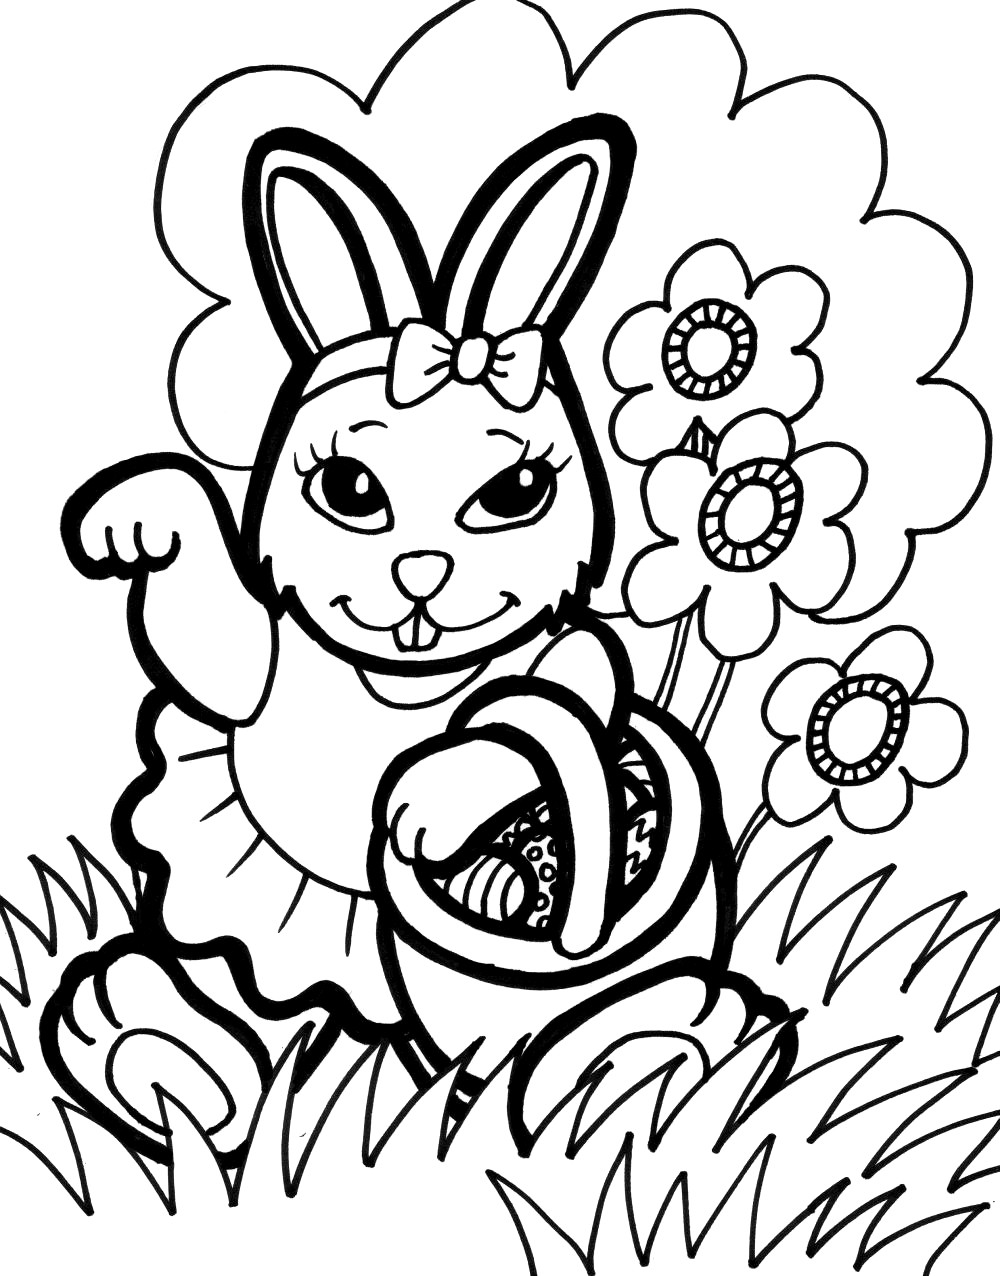 Bunny Coloring Pages For Kids
 Bunny Coloring Pages Best Coloring Pages For Kids